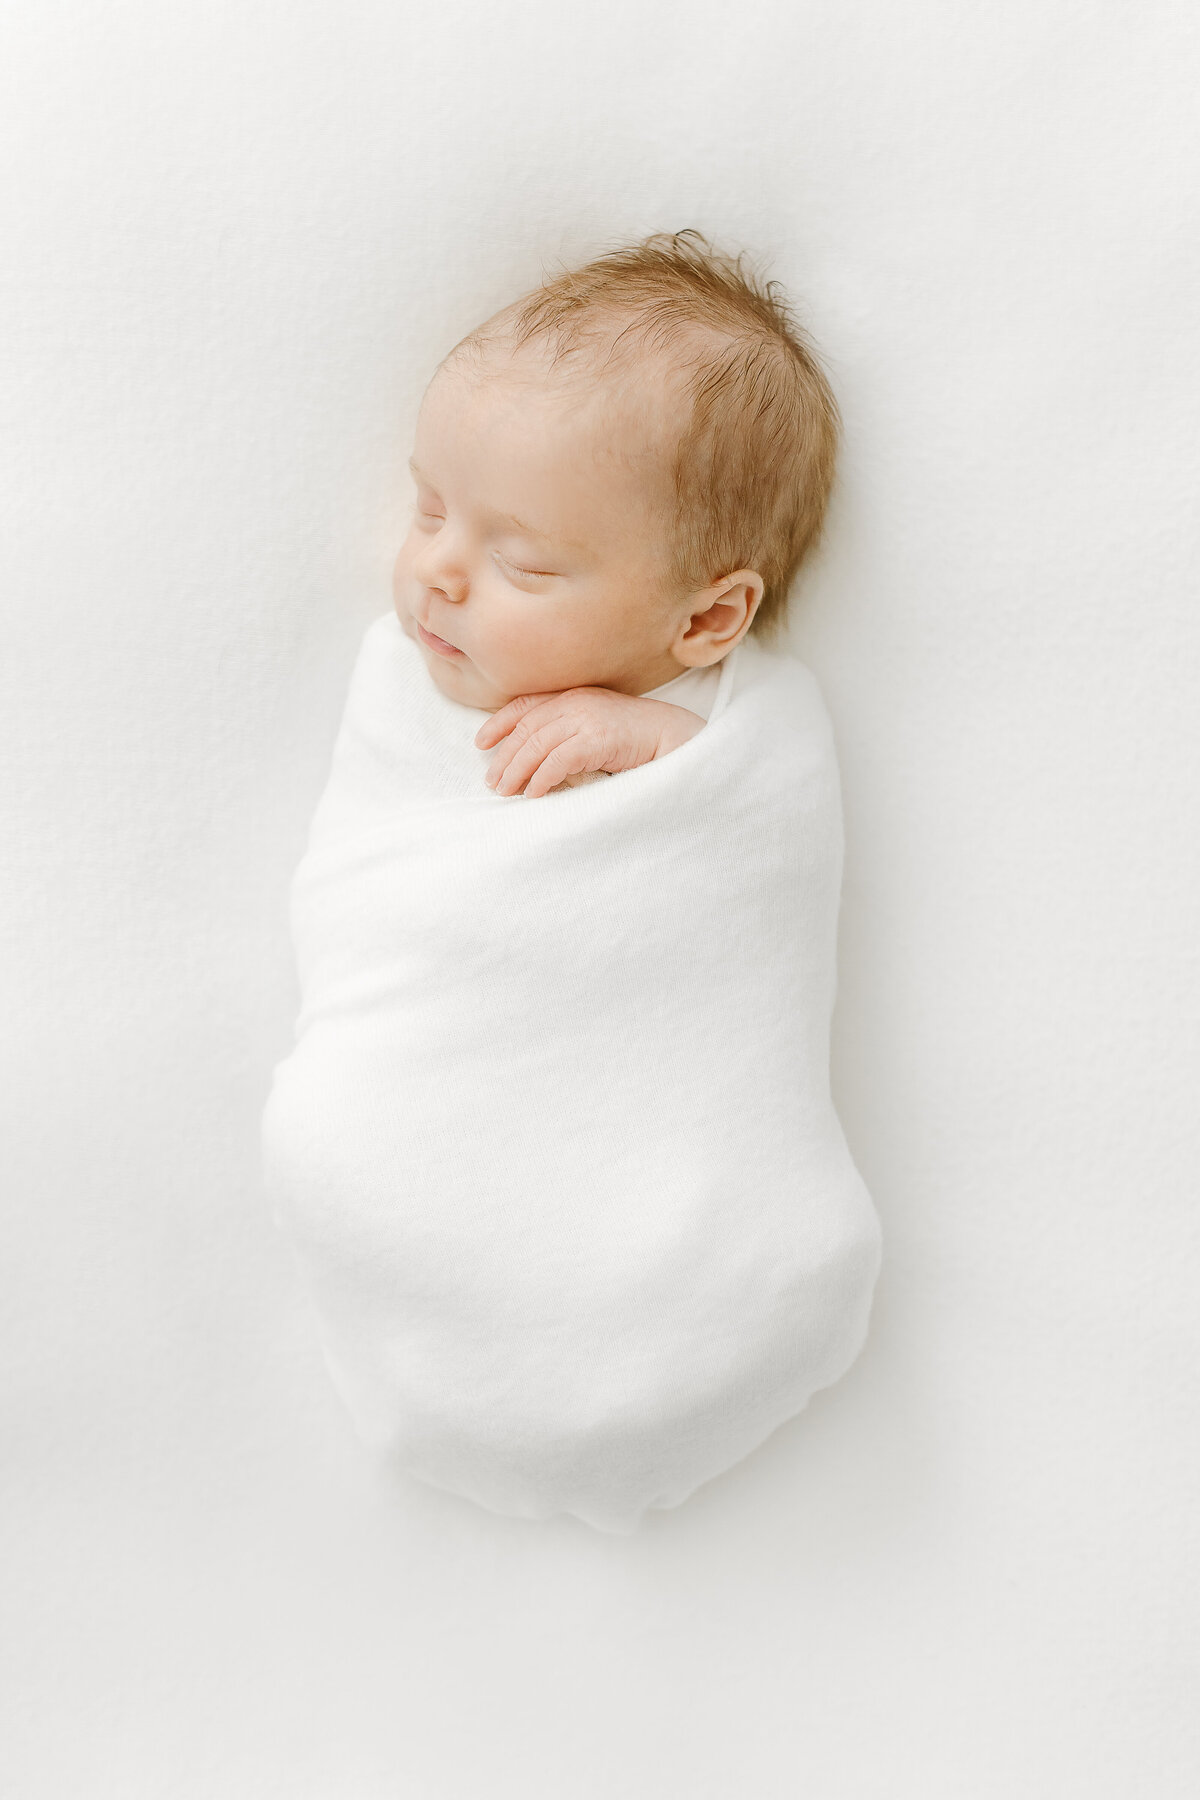 A sleeping baby swaddled in white on a white blanket by washington dc newborn photographerwashington dc newborn photographer